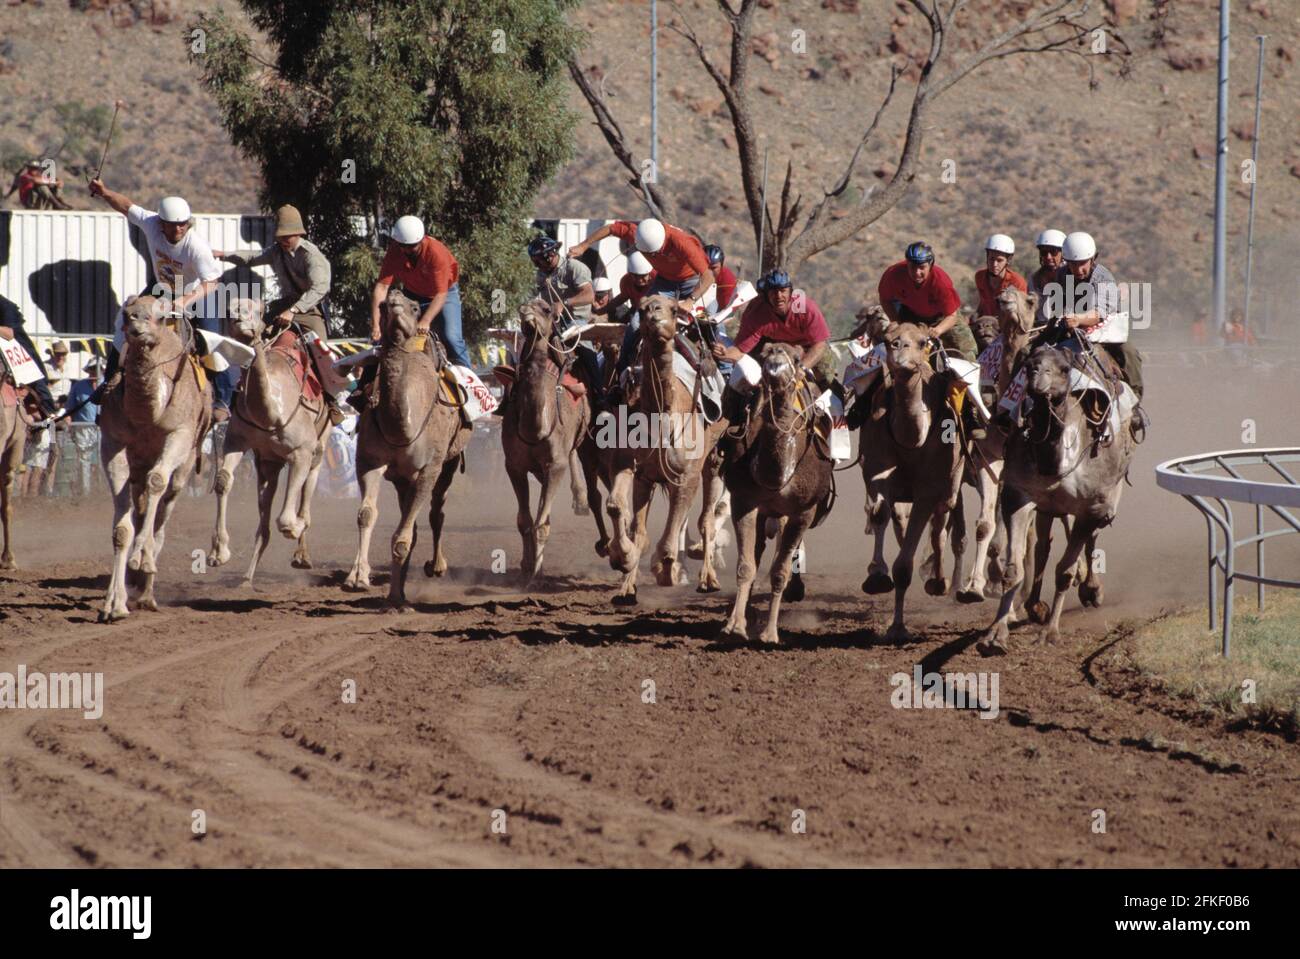 Australia. Northern Territory. Alice Springs region. Camel Cup Races. Stock Photo